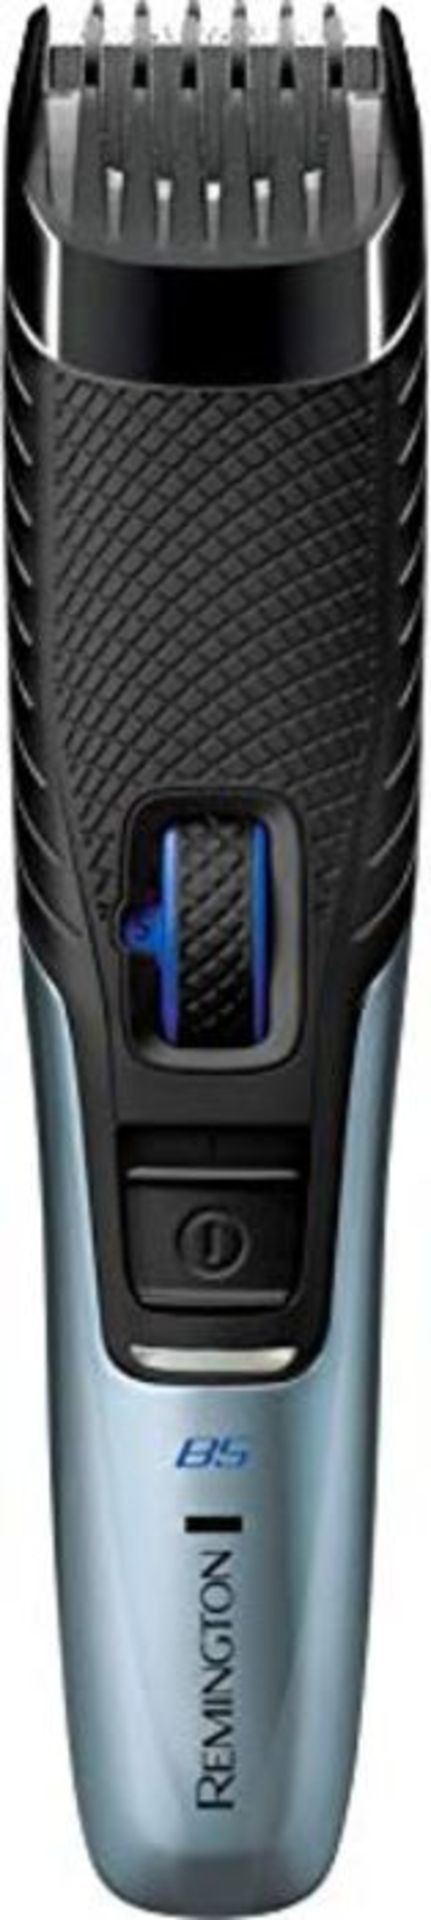 Remington B5 Style Series Cordless Beard and Stubble Trimmer for Men with Adjustable Z